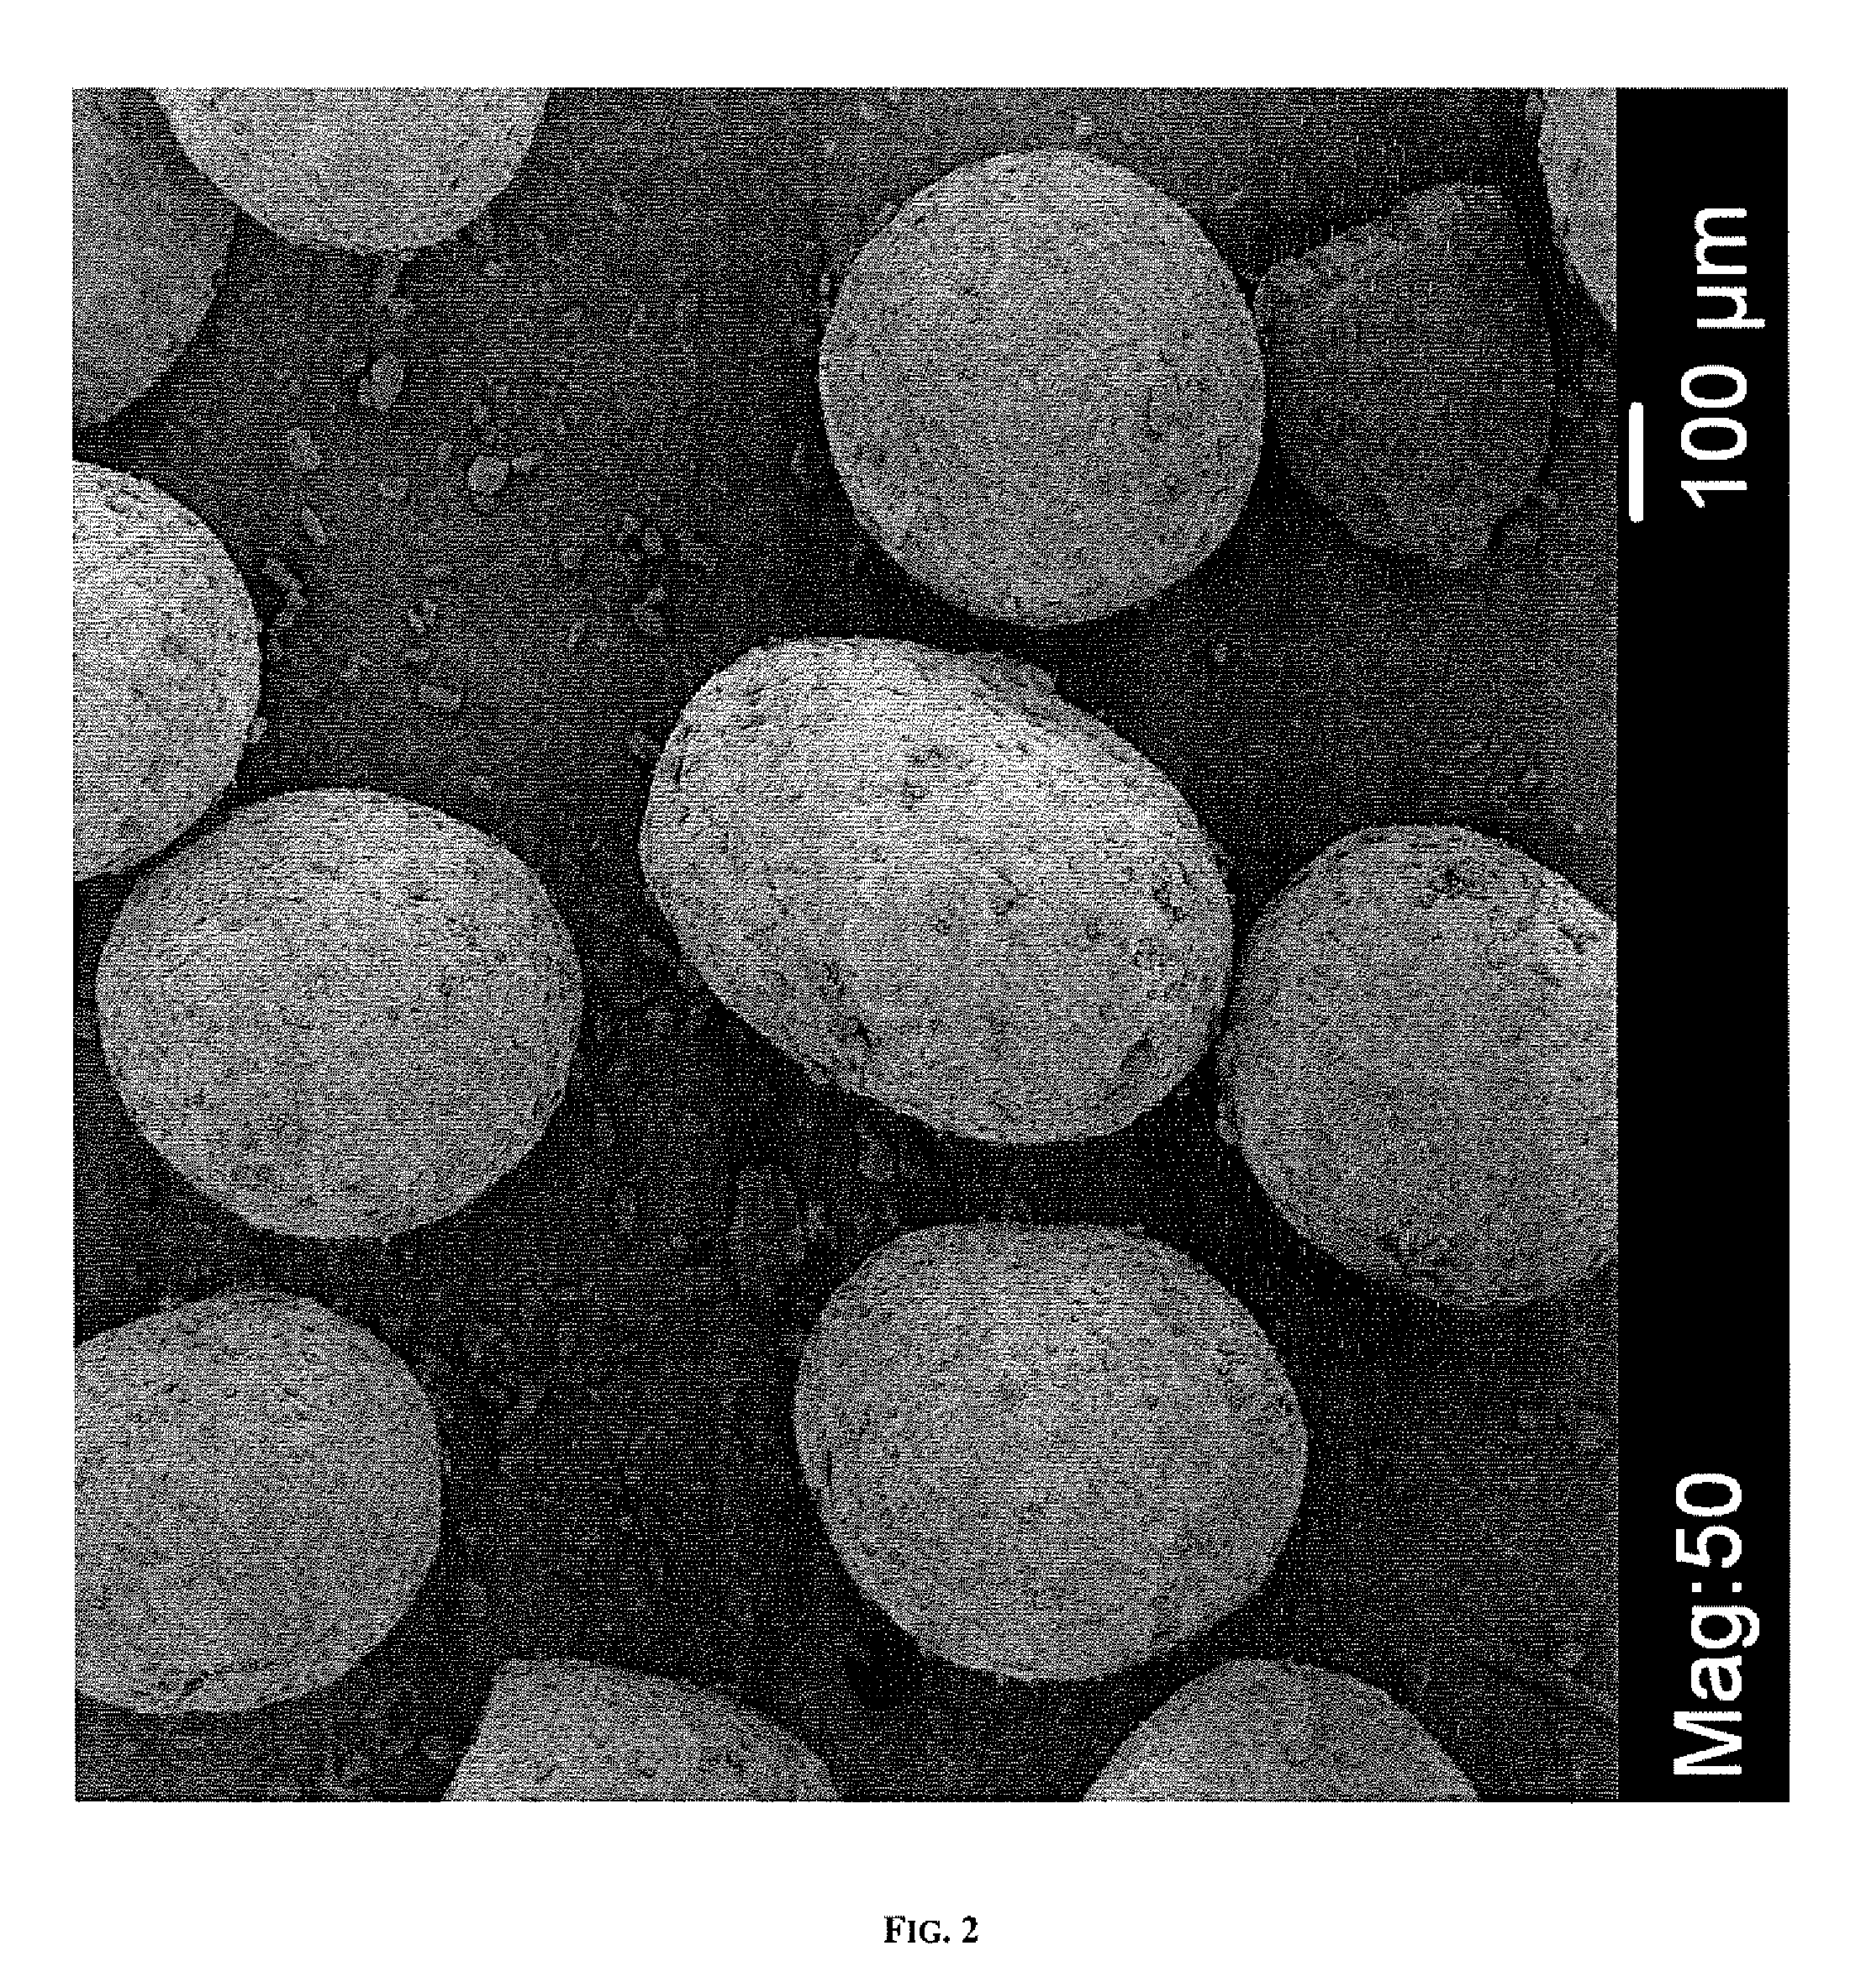 Method for Producing a Low Sodium Salt Composition